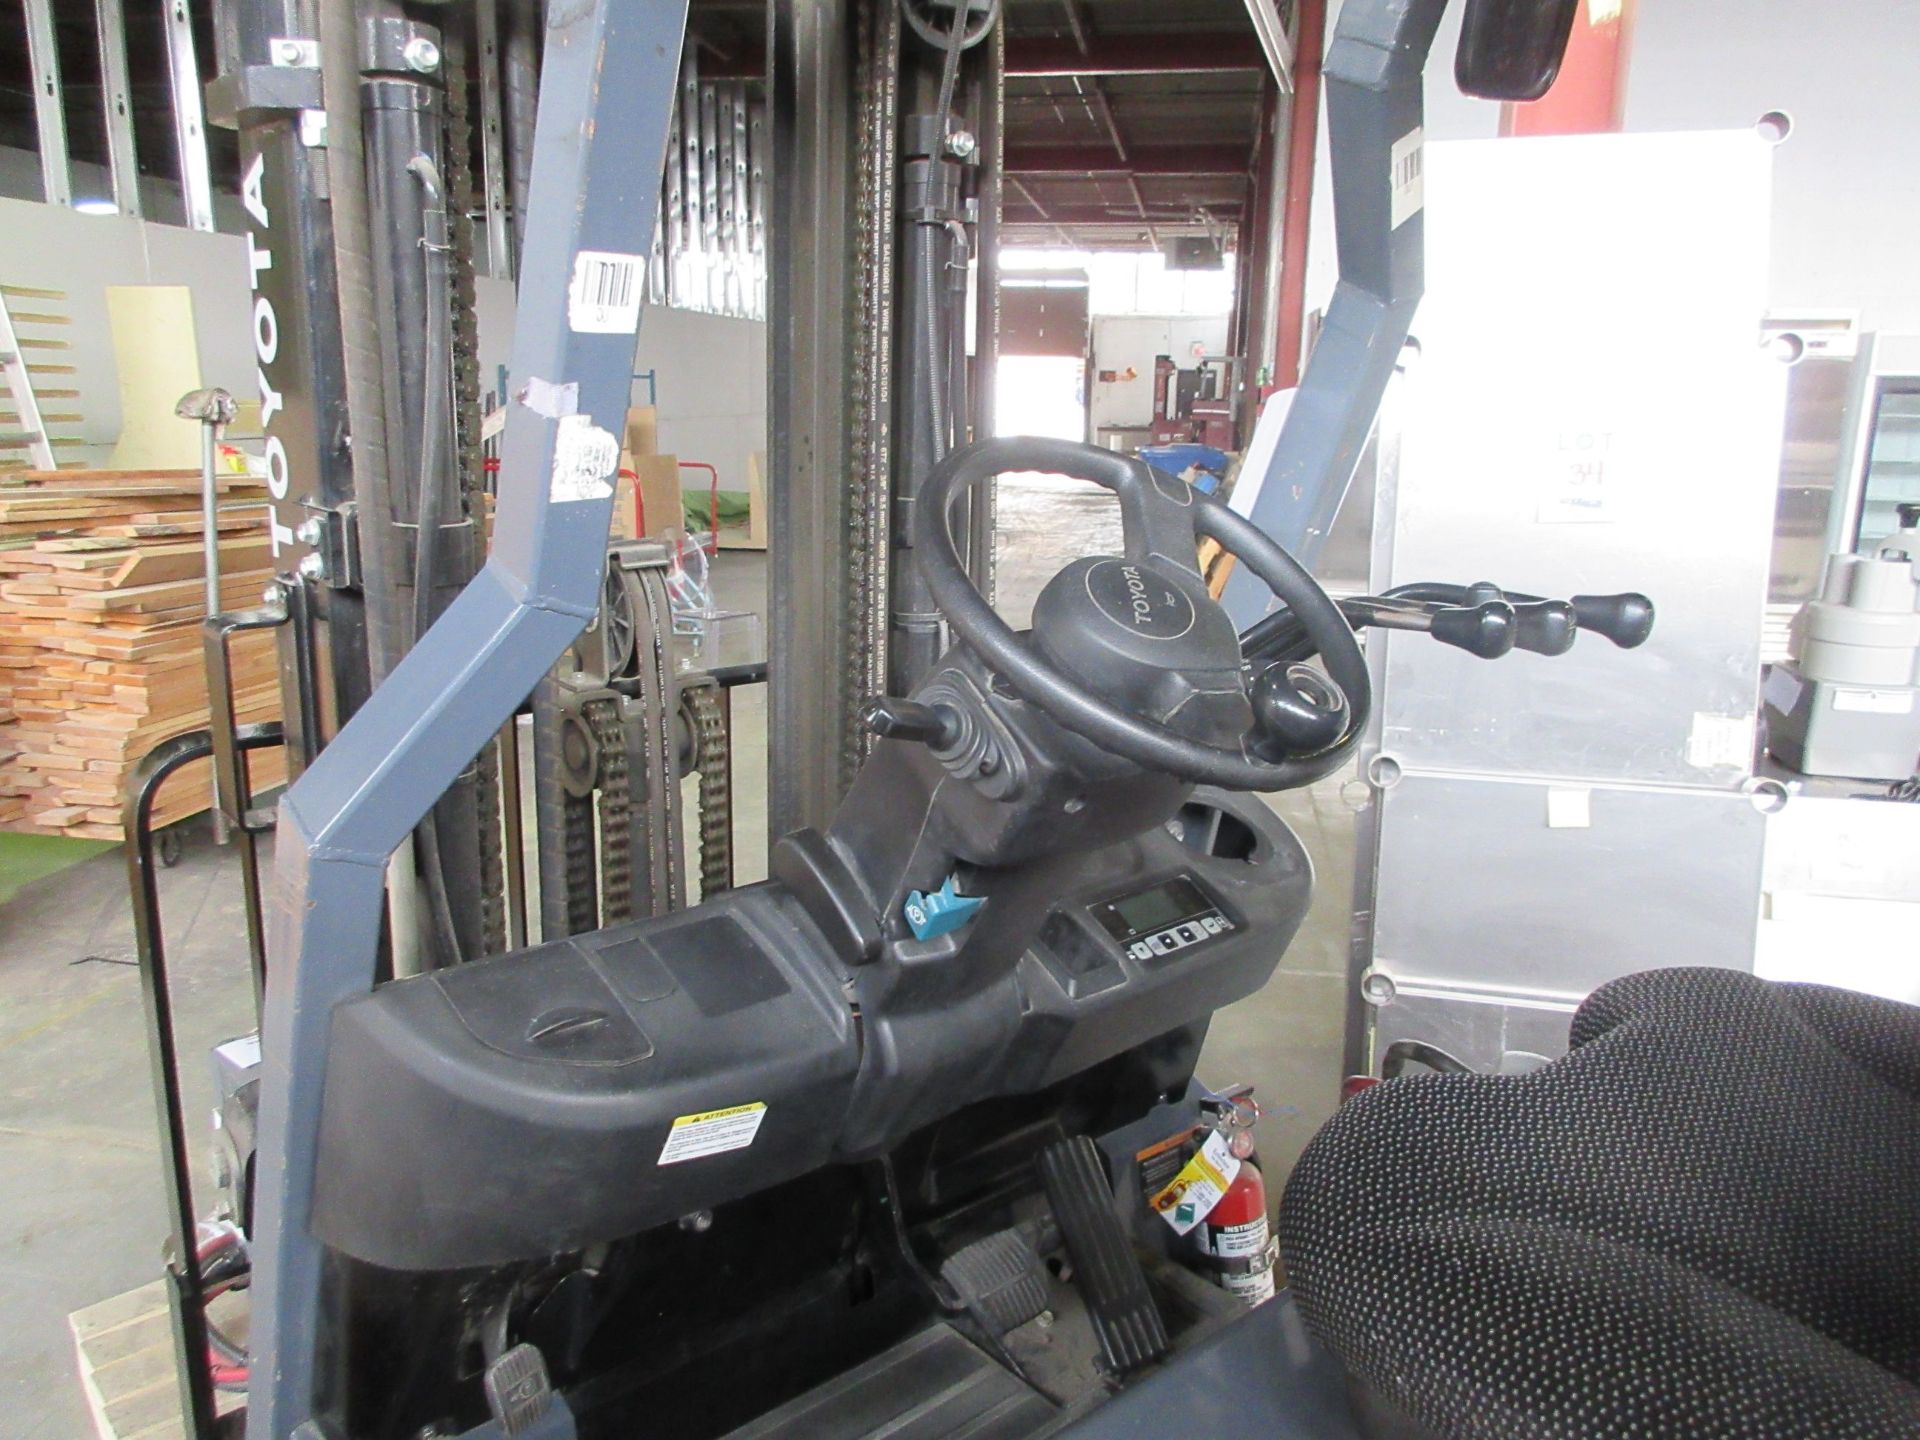 TOYOTA electric forklift Mod: 8FBCV25, 3 sections, 4400 LB capacity, 48V c/w opportunity charger, - Image 6 of 11